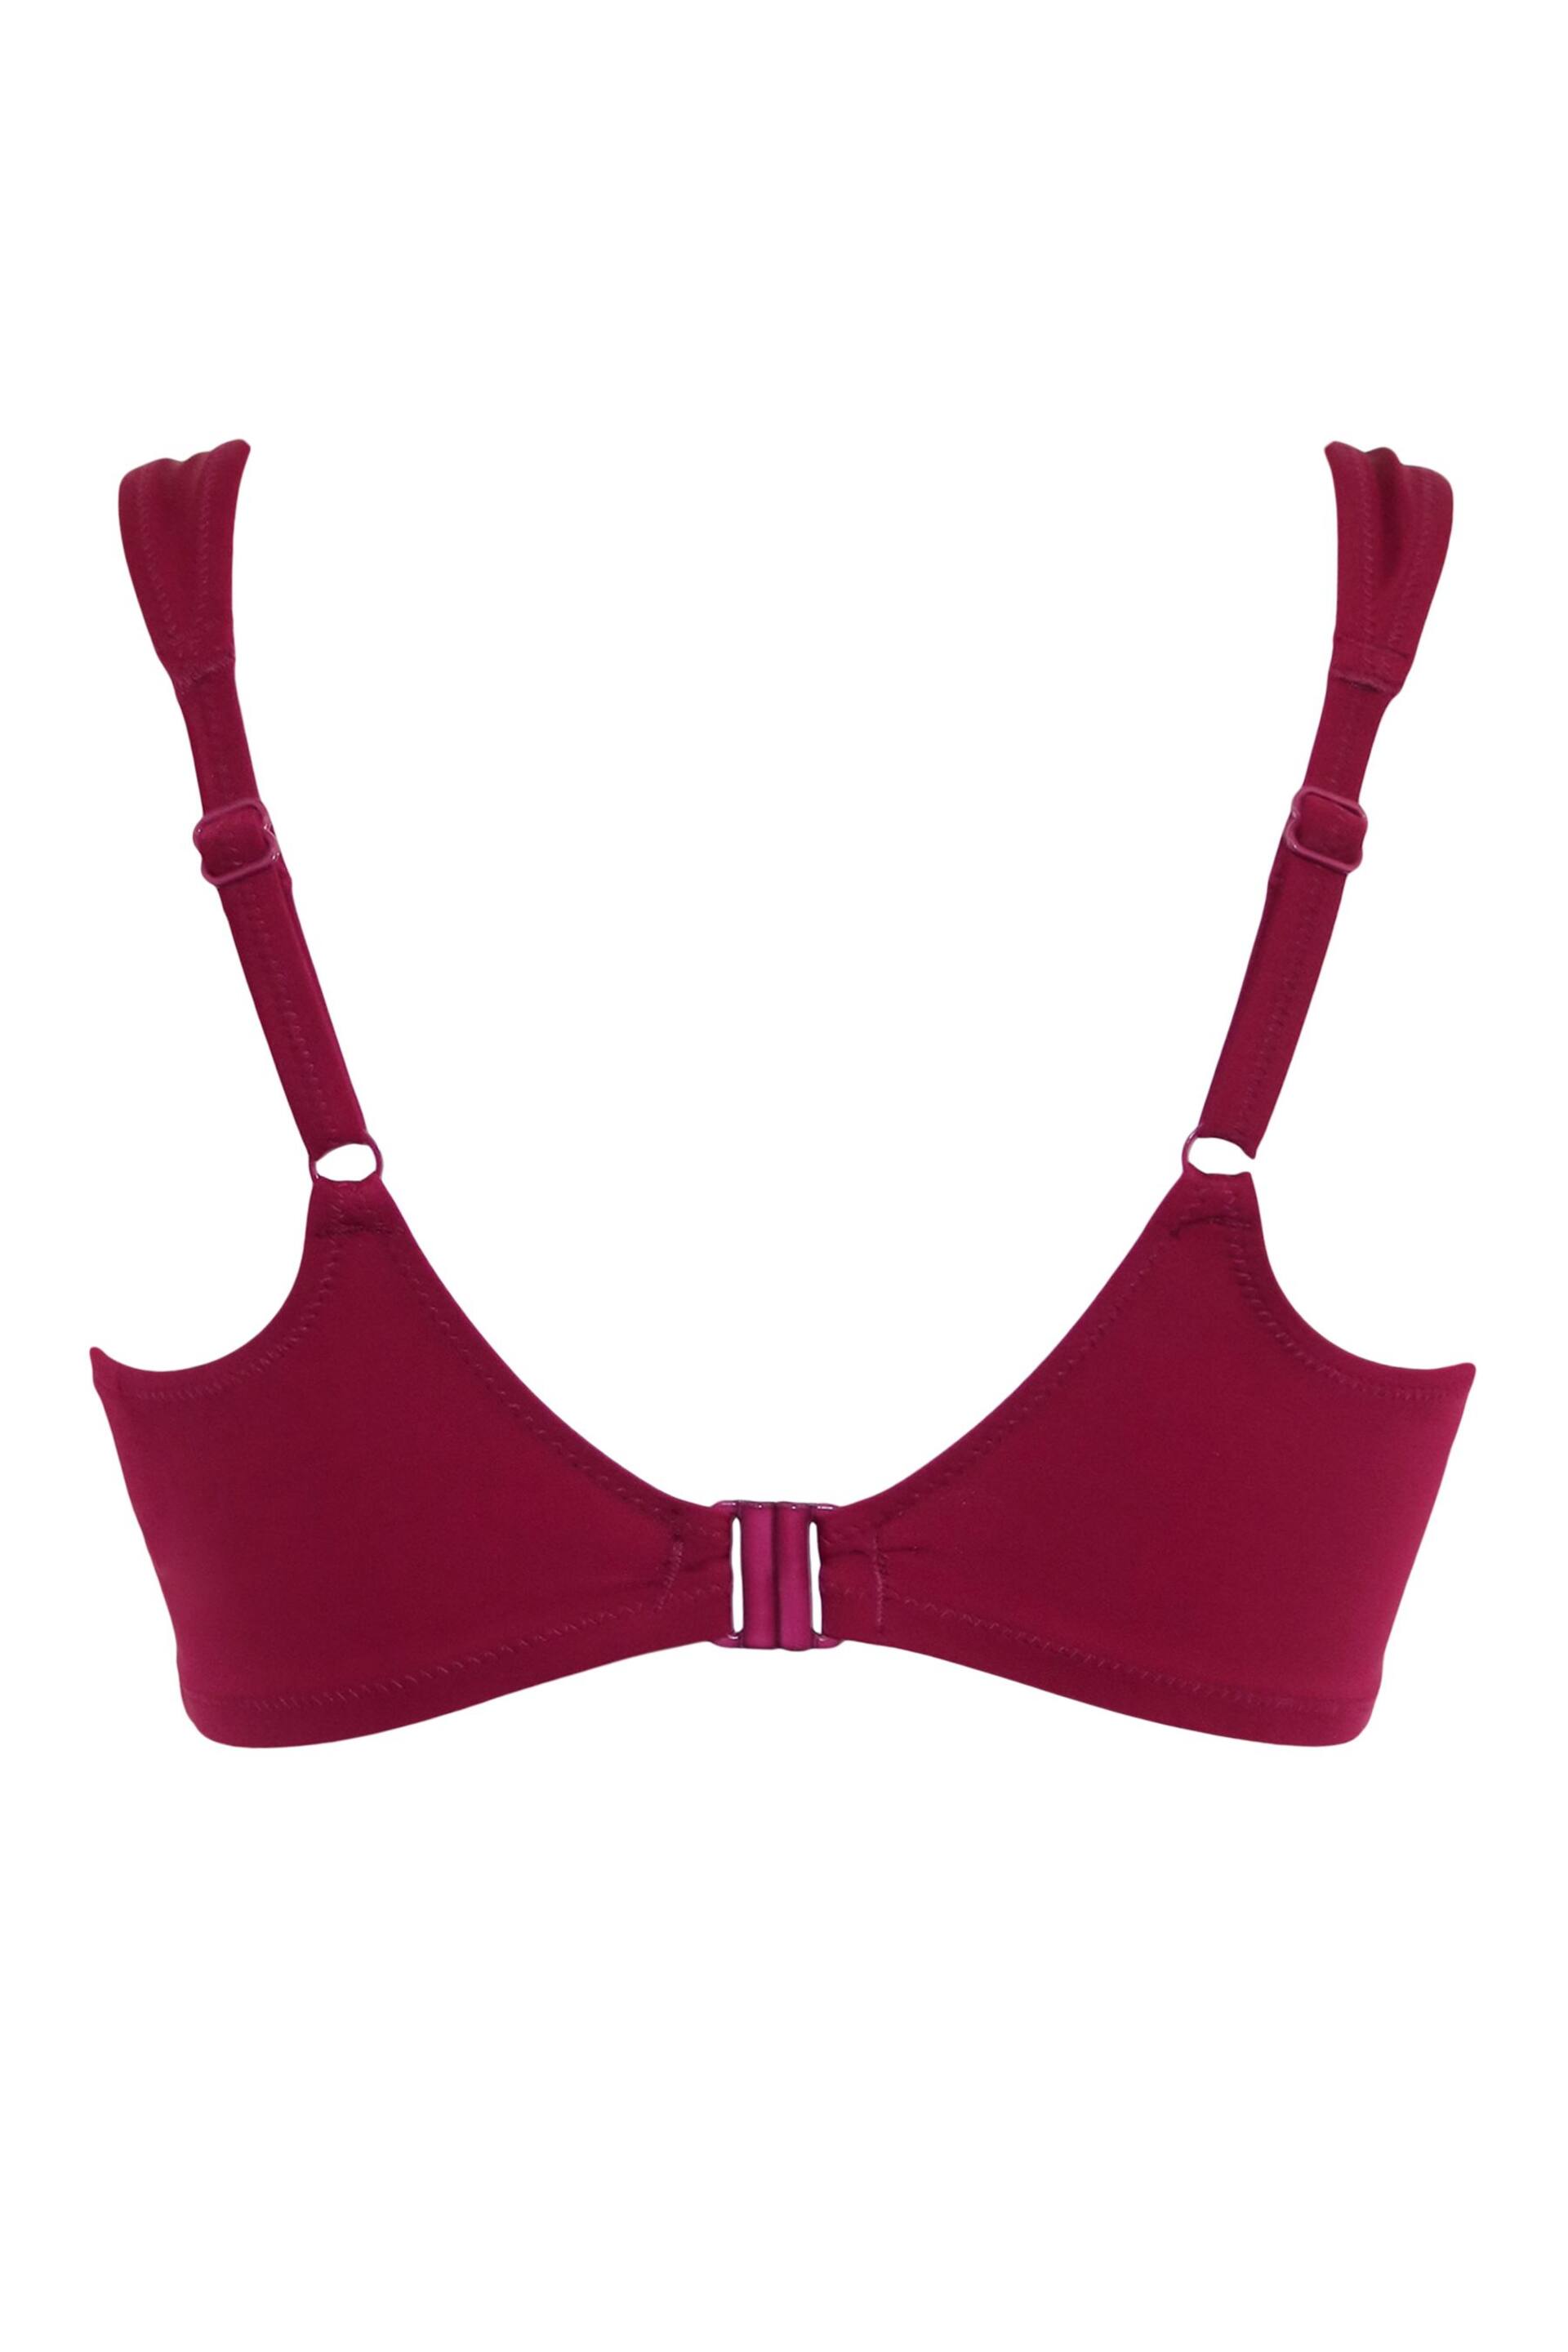 Pour Moi Red Space Underwired Cami Top - Image 4 of 4